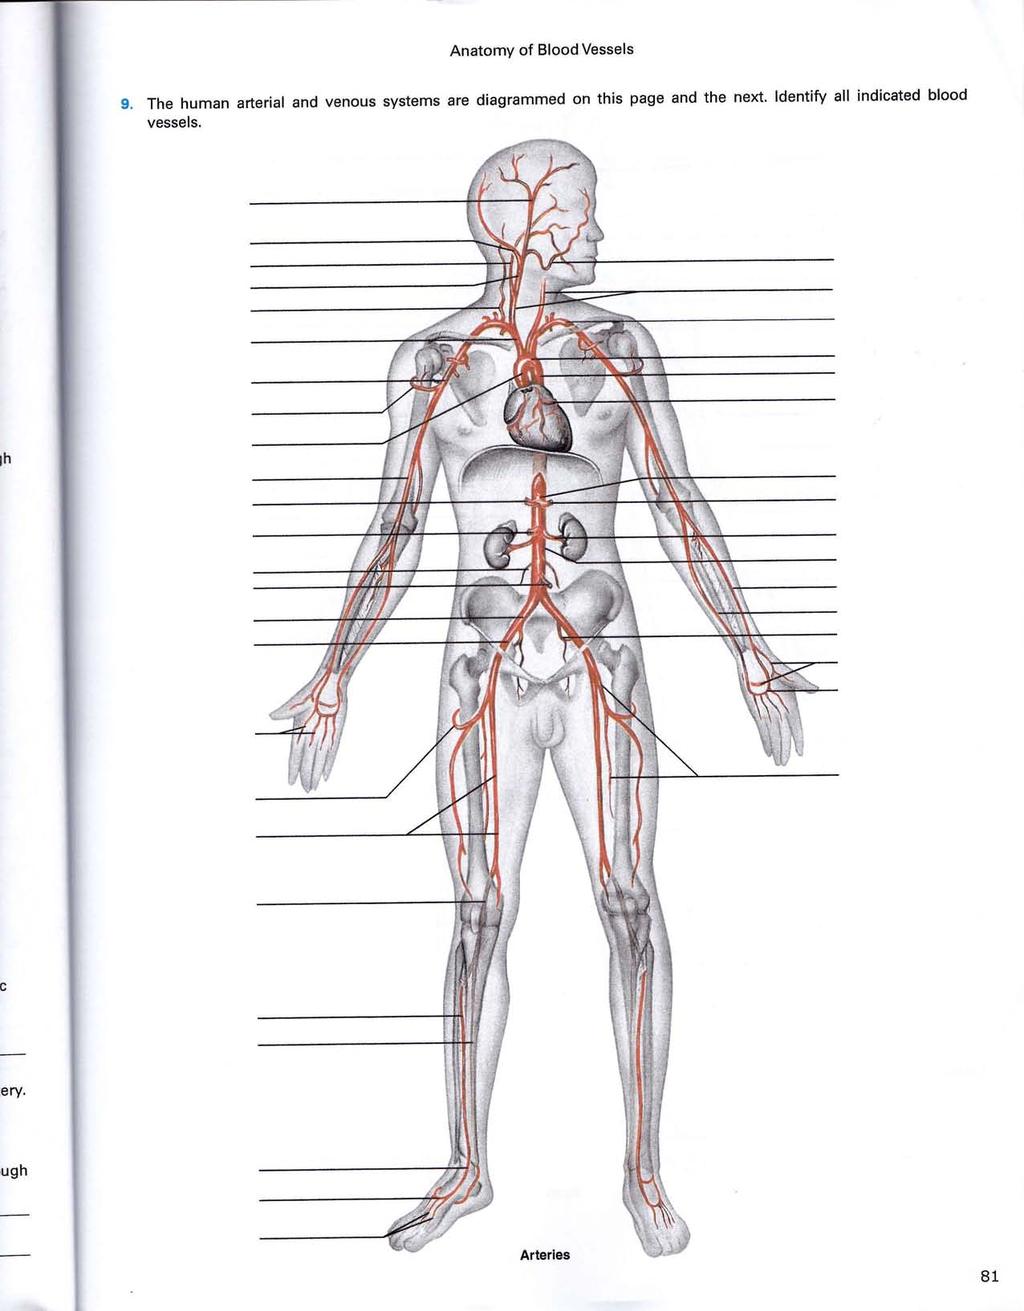 AnatomY of Blood Vessels The human arterial venous systems are